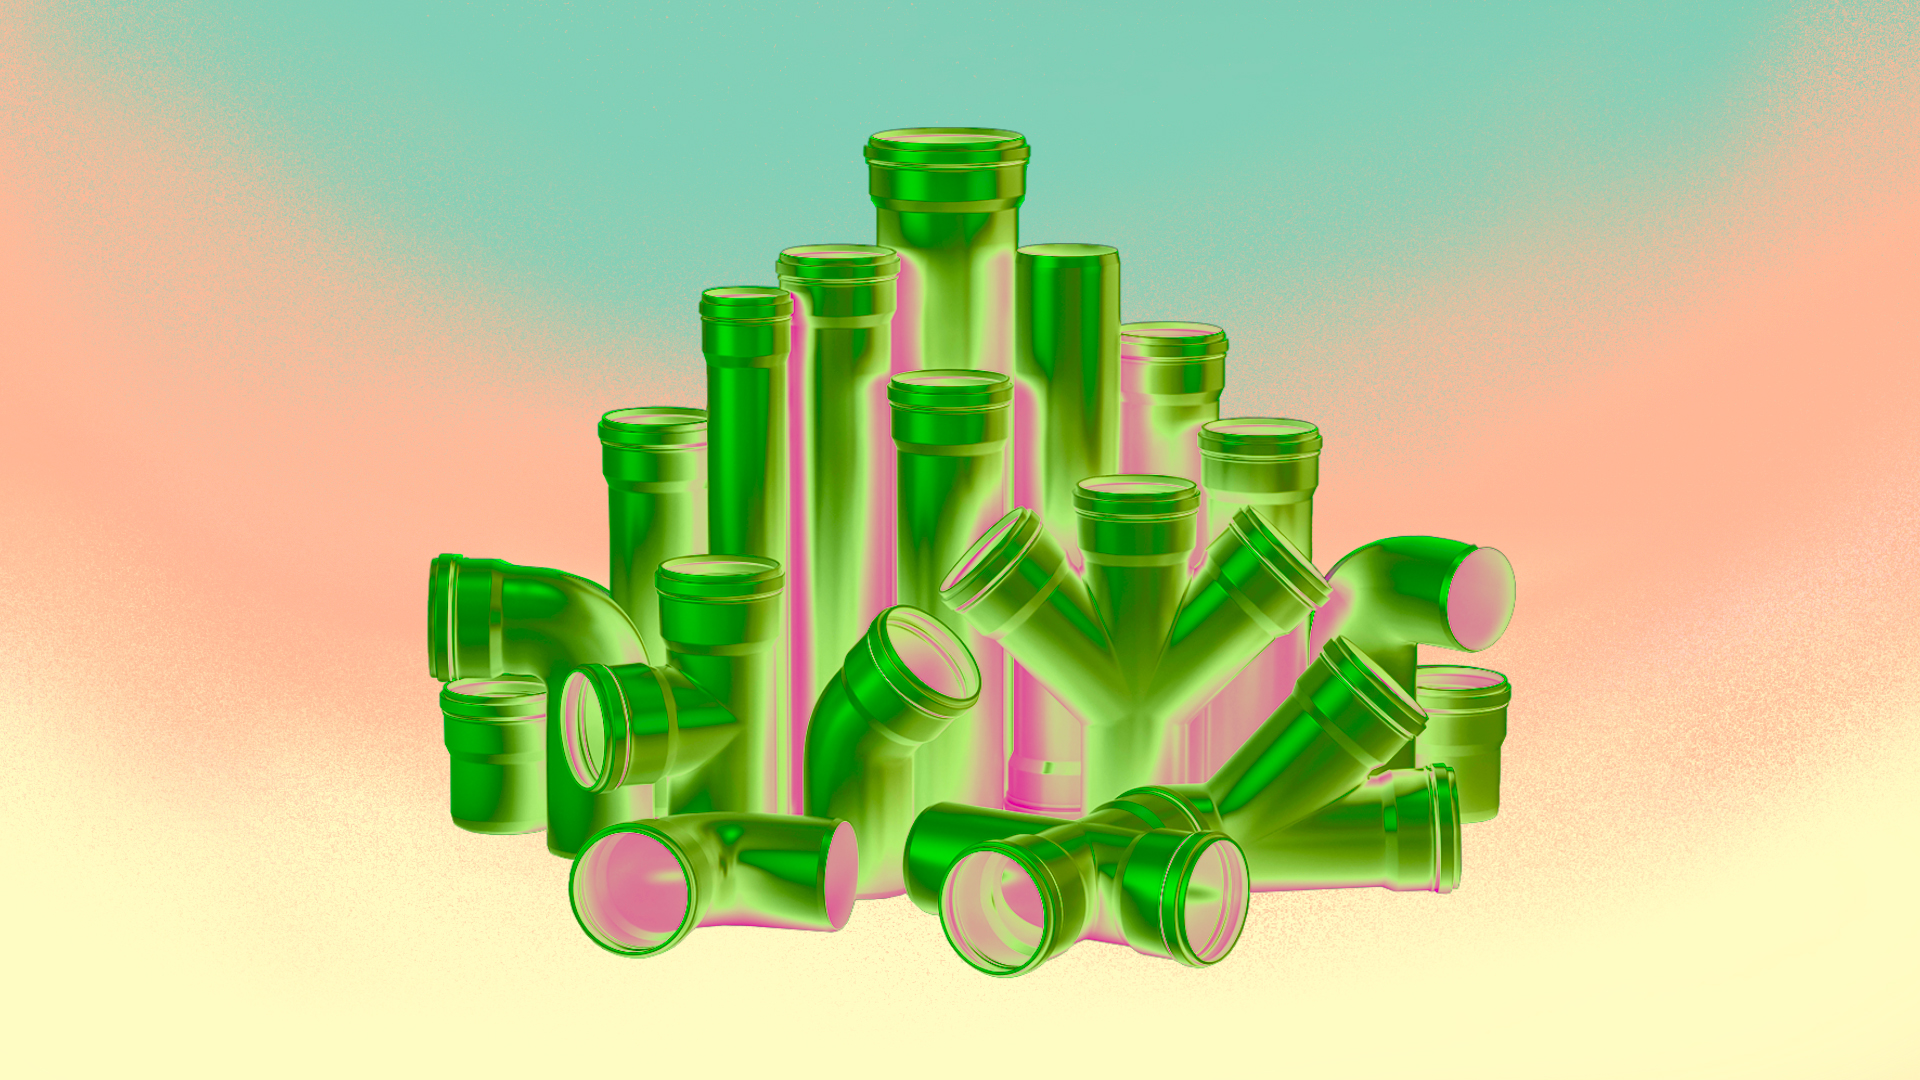 Pyramid of green tinted plastic pipes on blue, pink and yellow gradient background